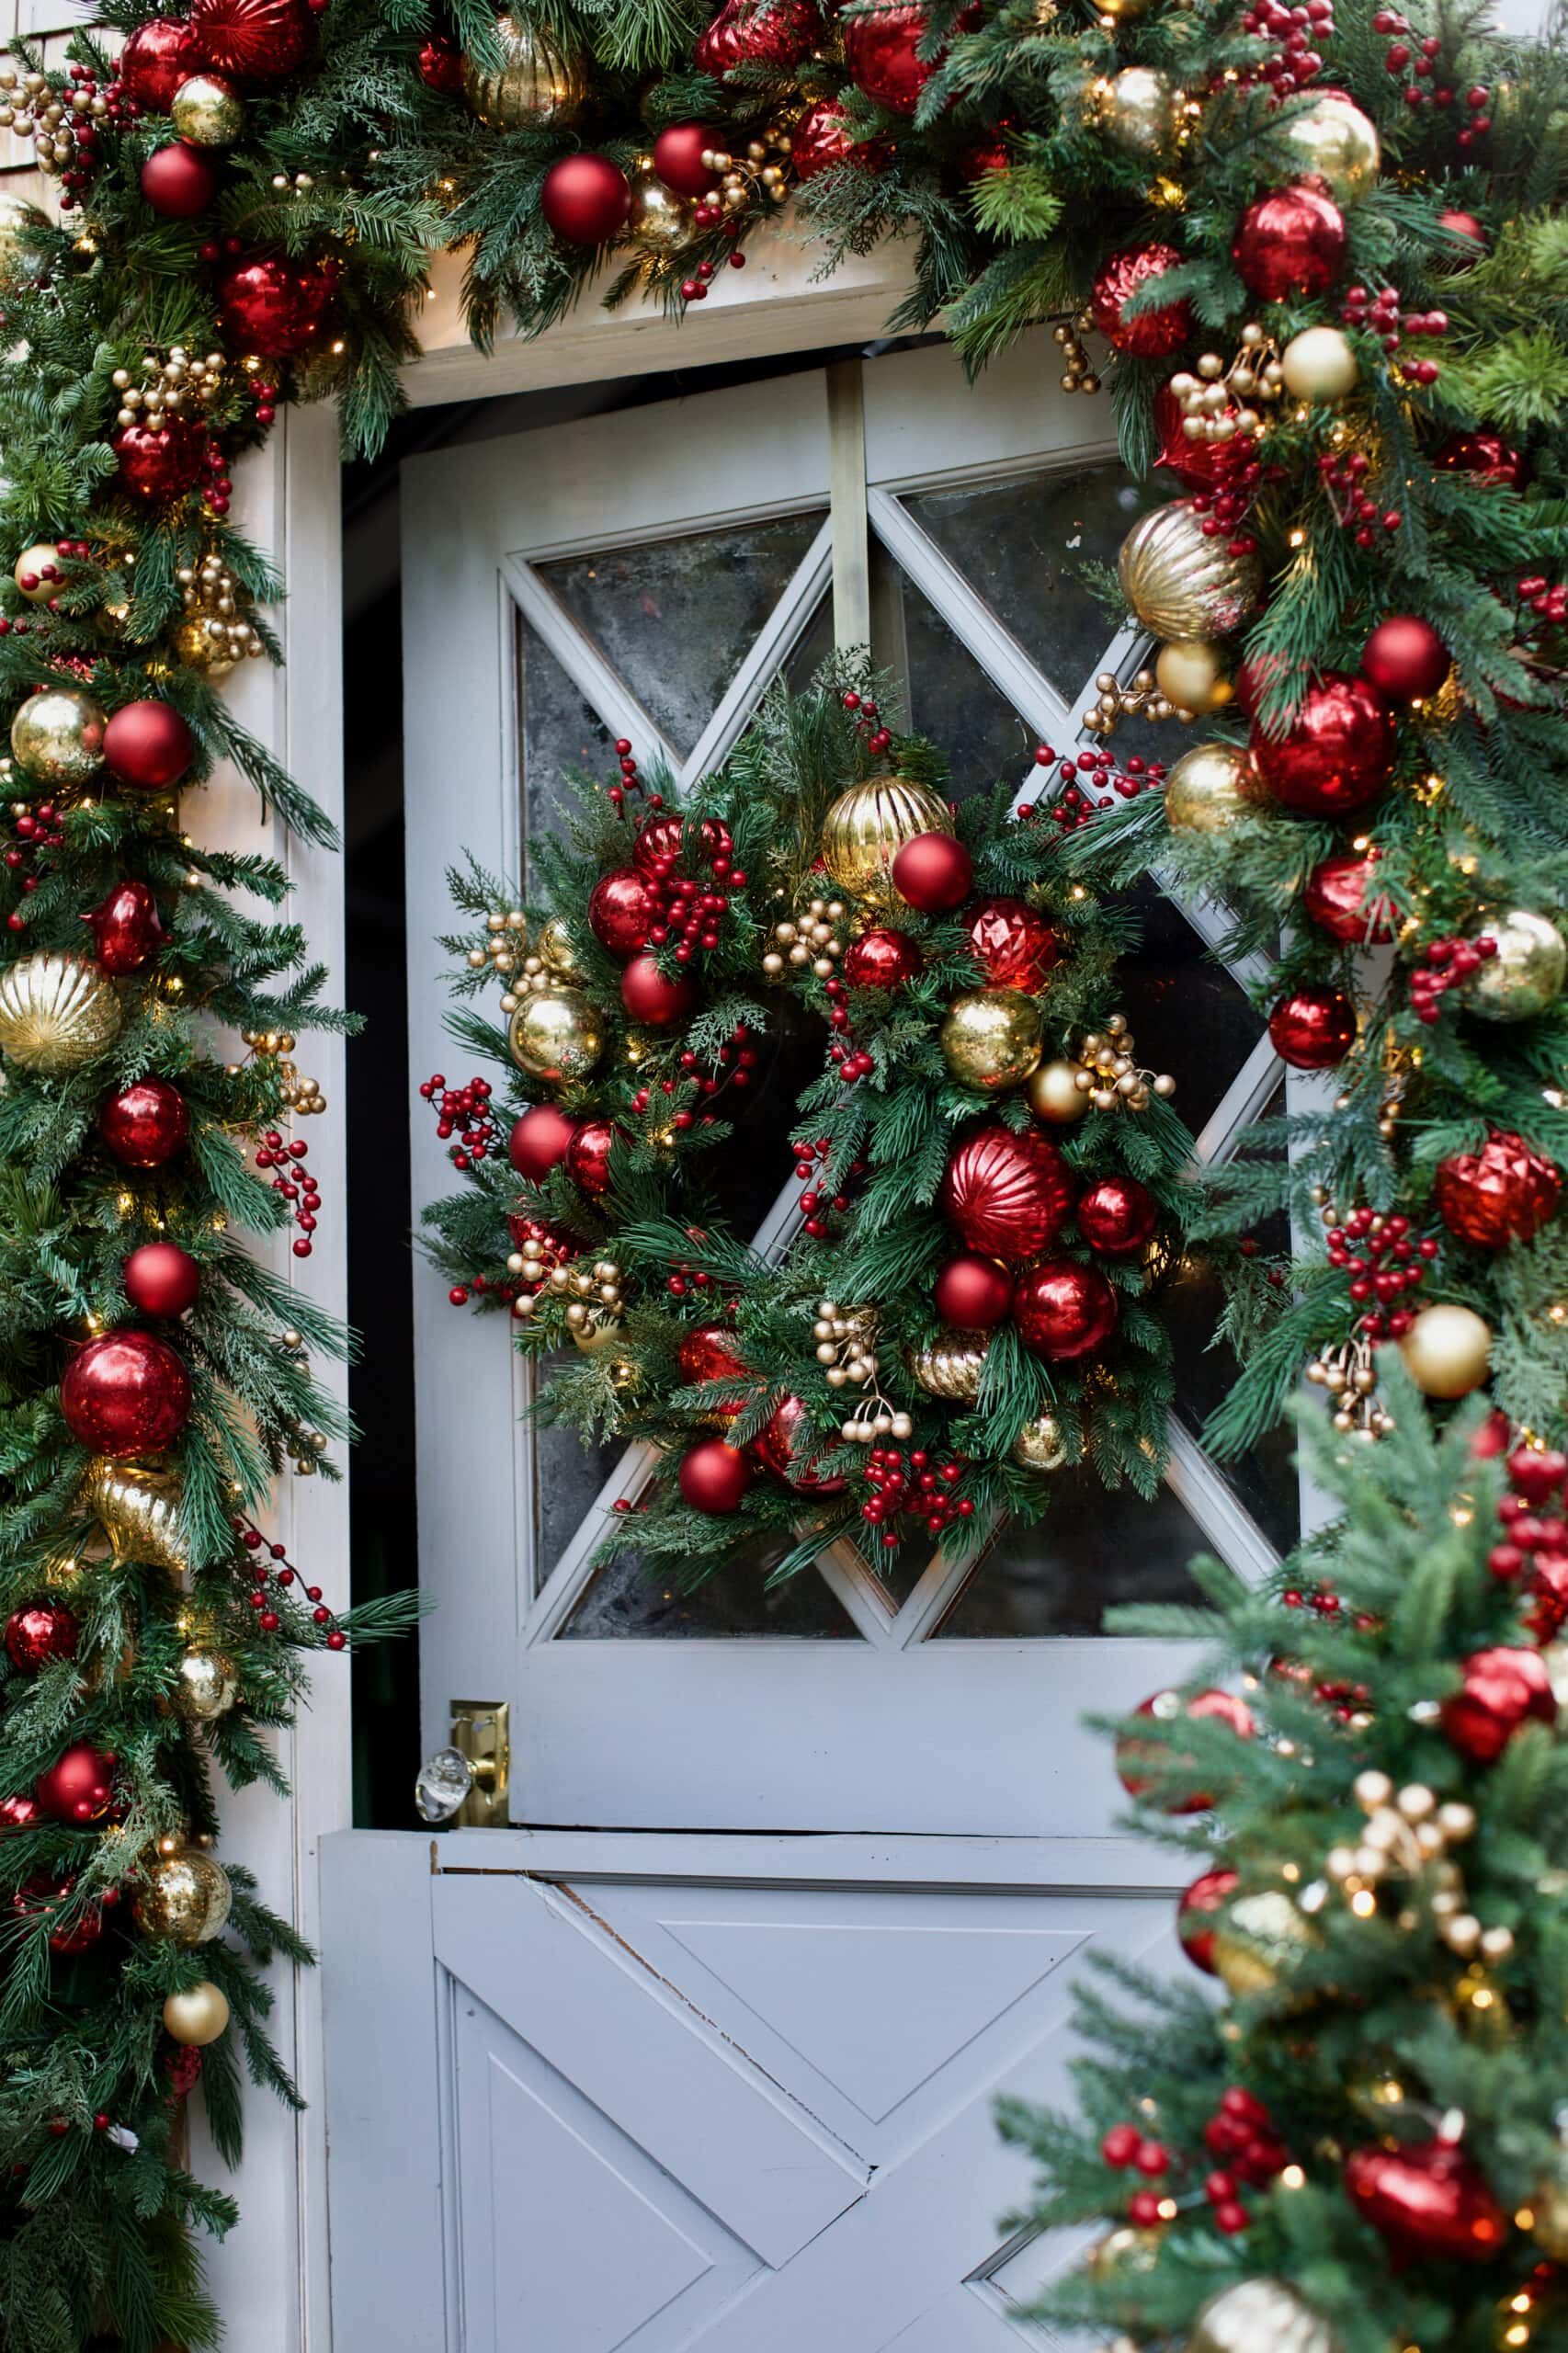 Festive Holiday Decor Ideas for Your Front Porch